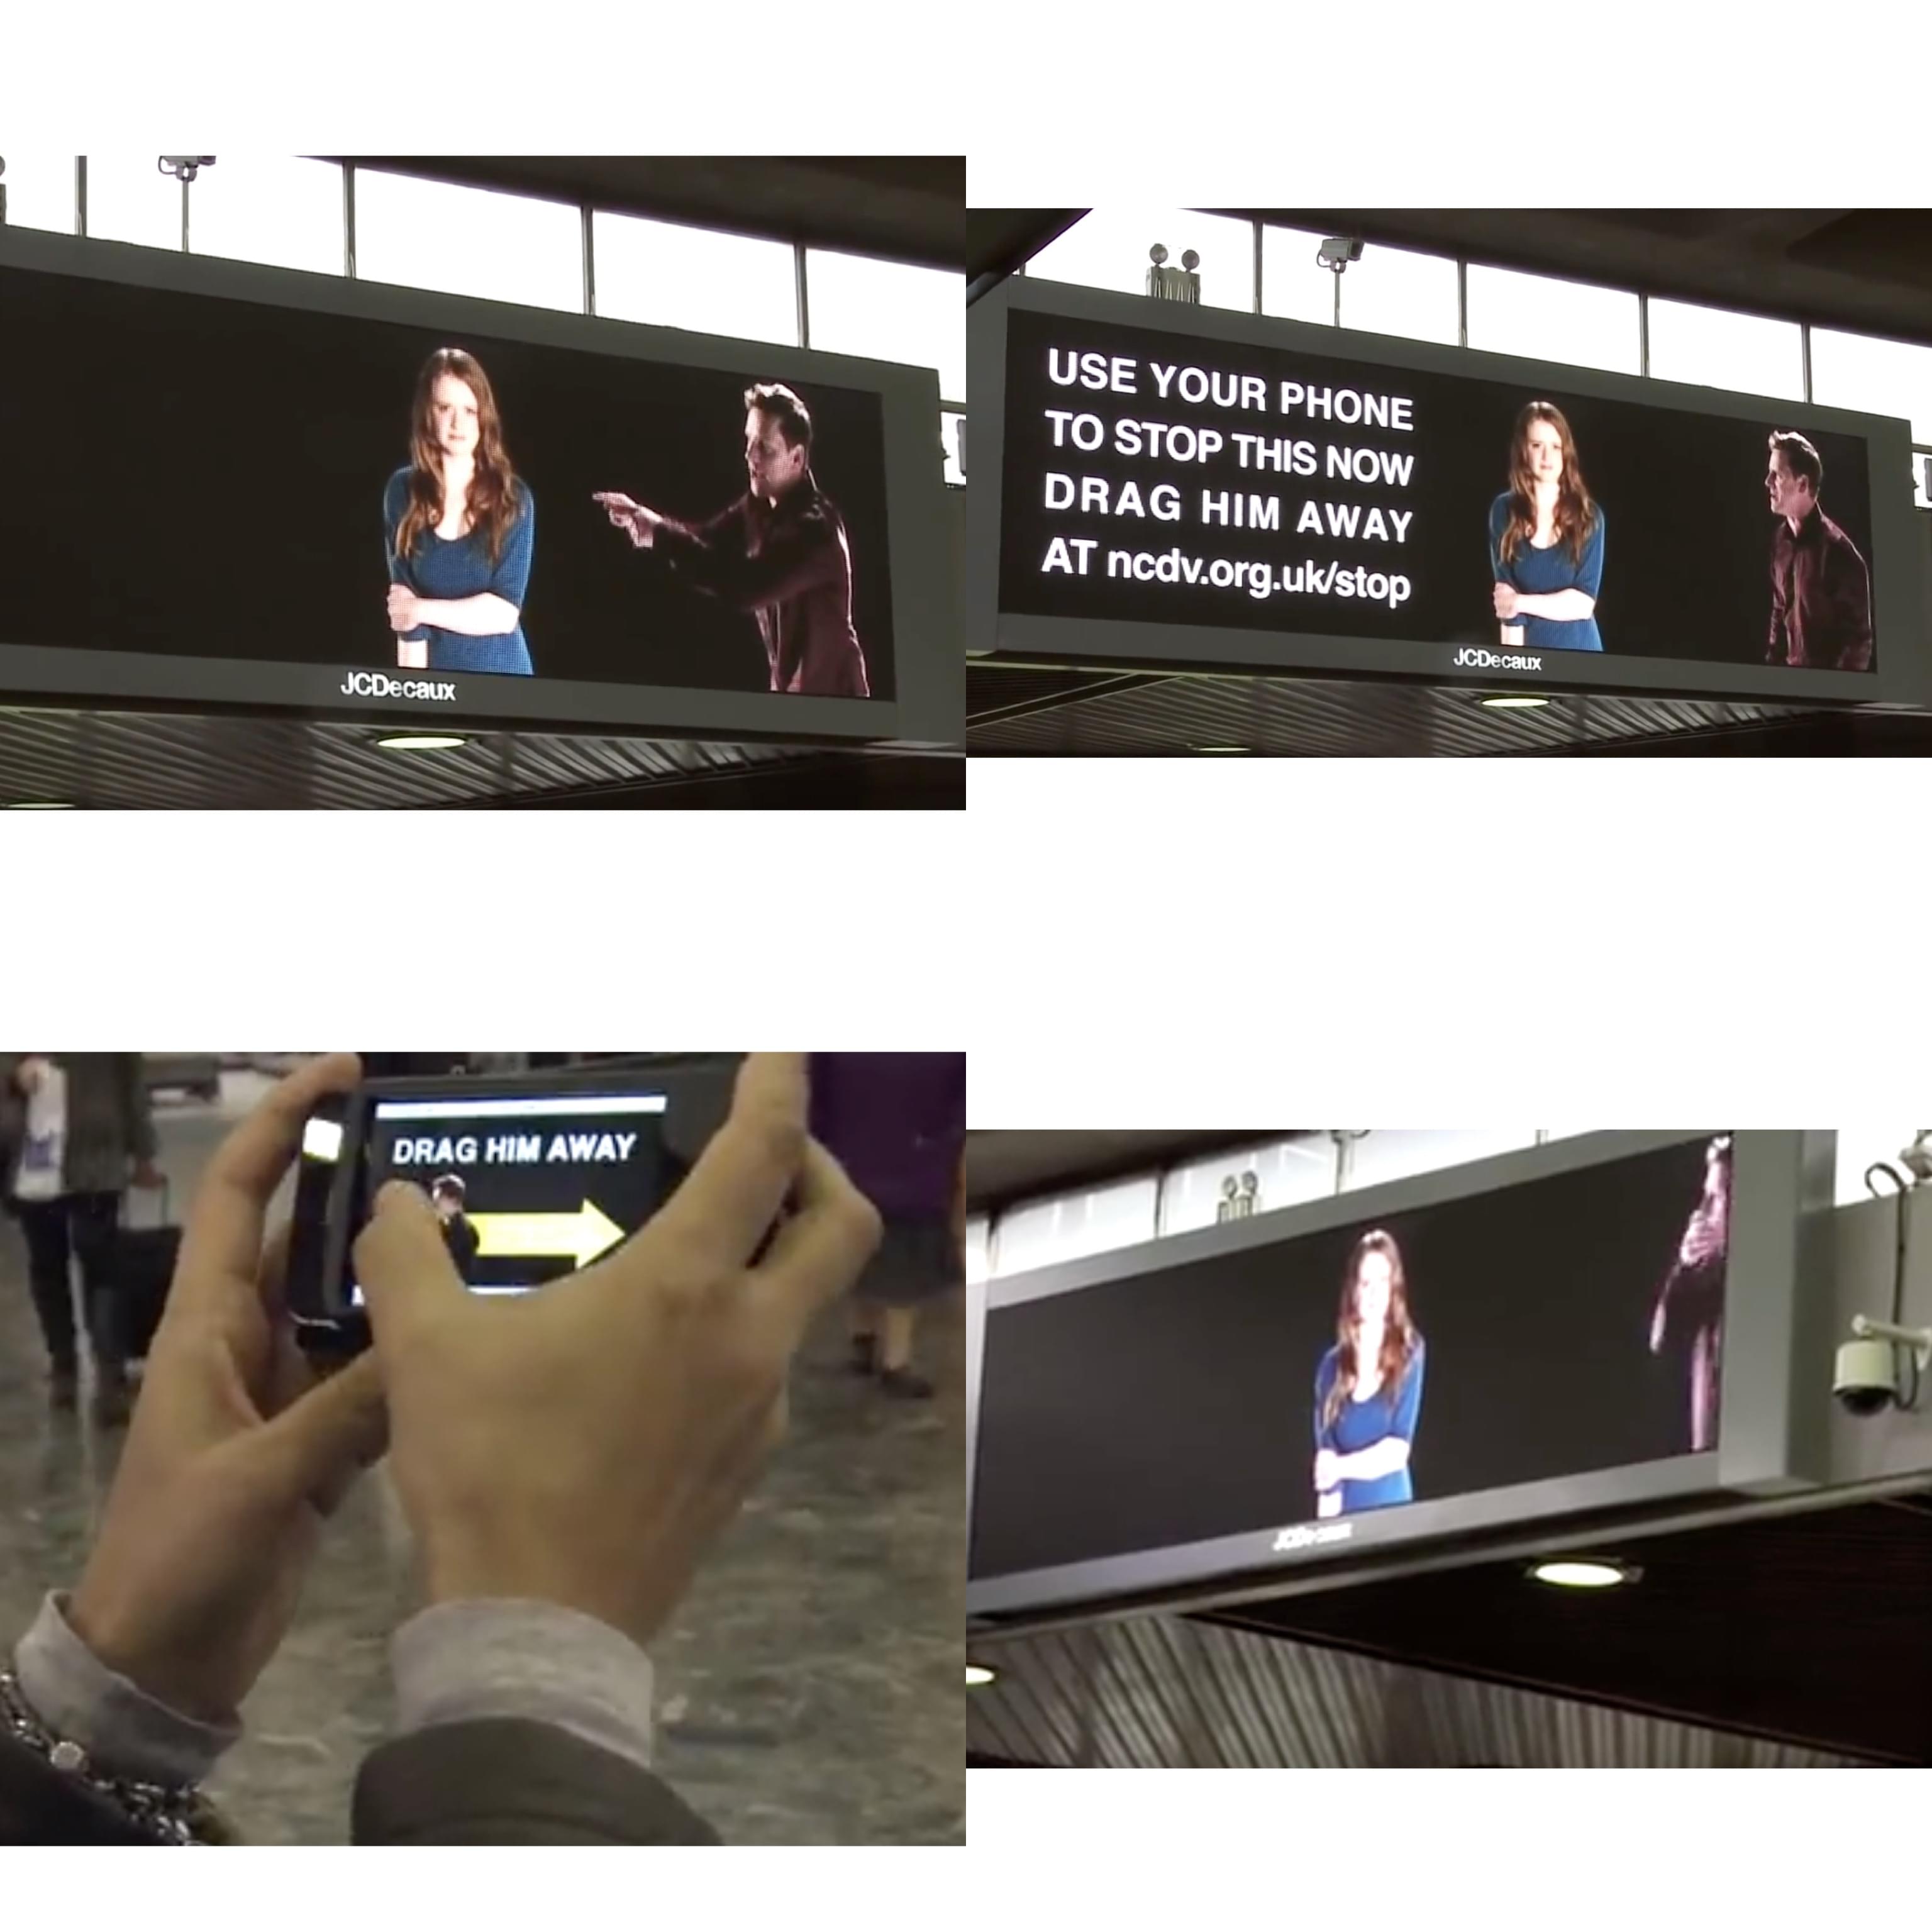 Interactive DOOH against domestic abuse